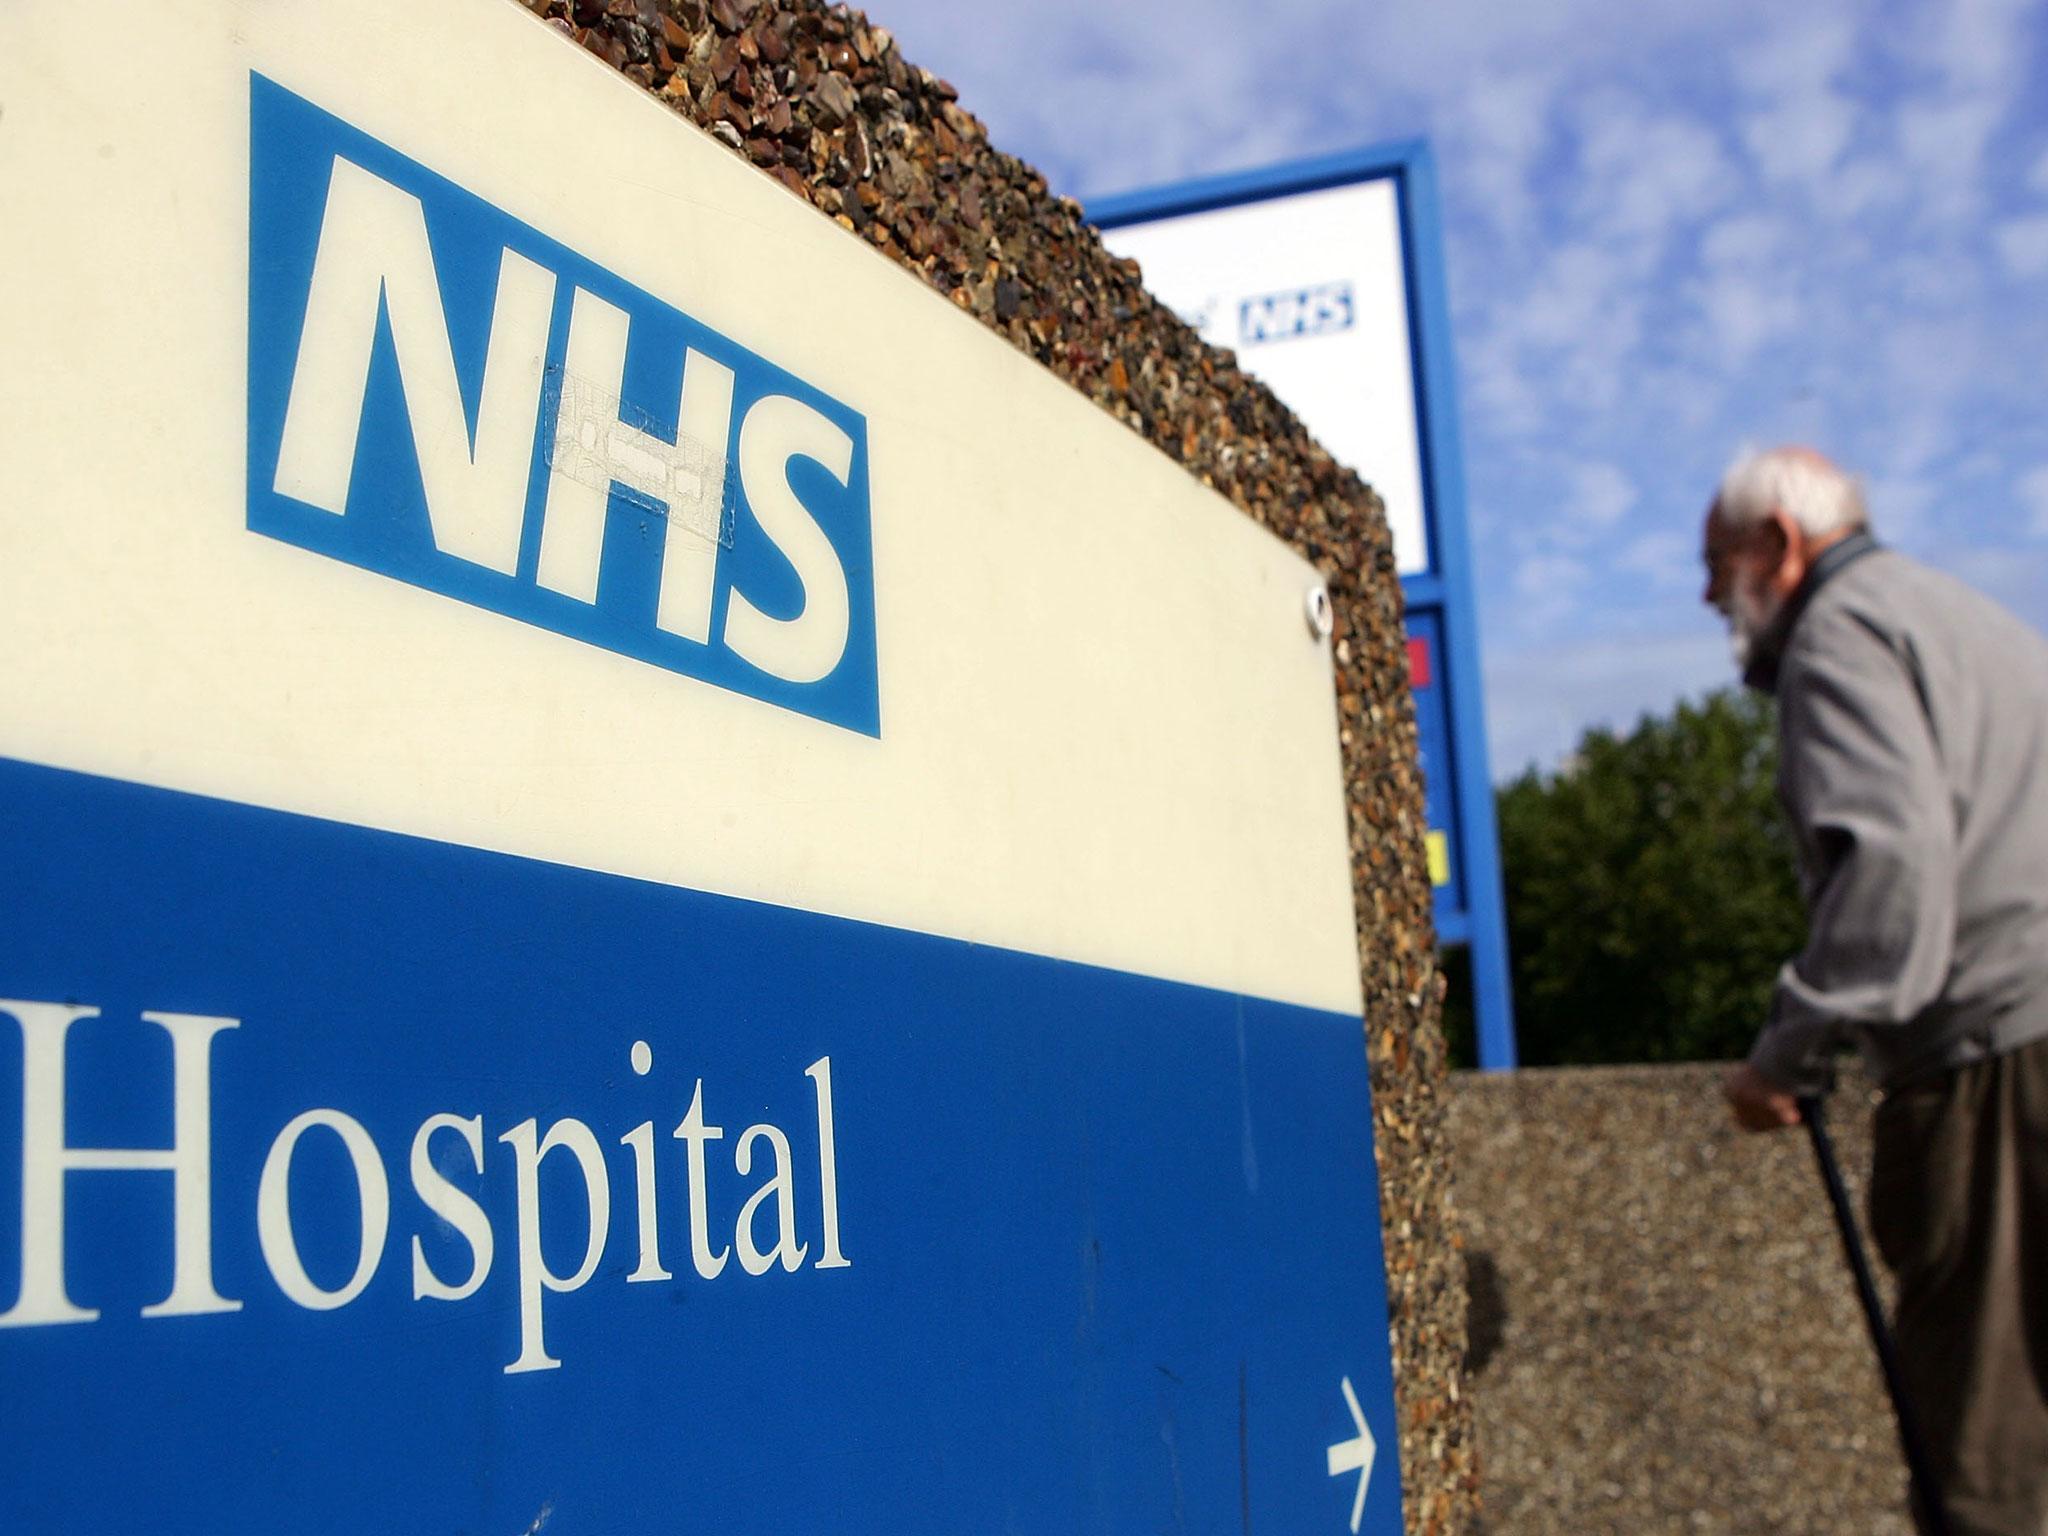 Partial knee replacements could be a cheaper intervention for the NHS